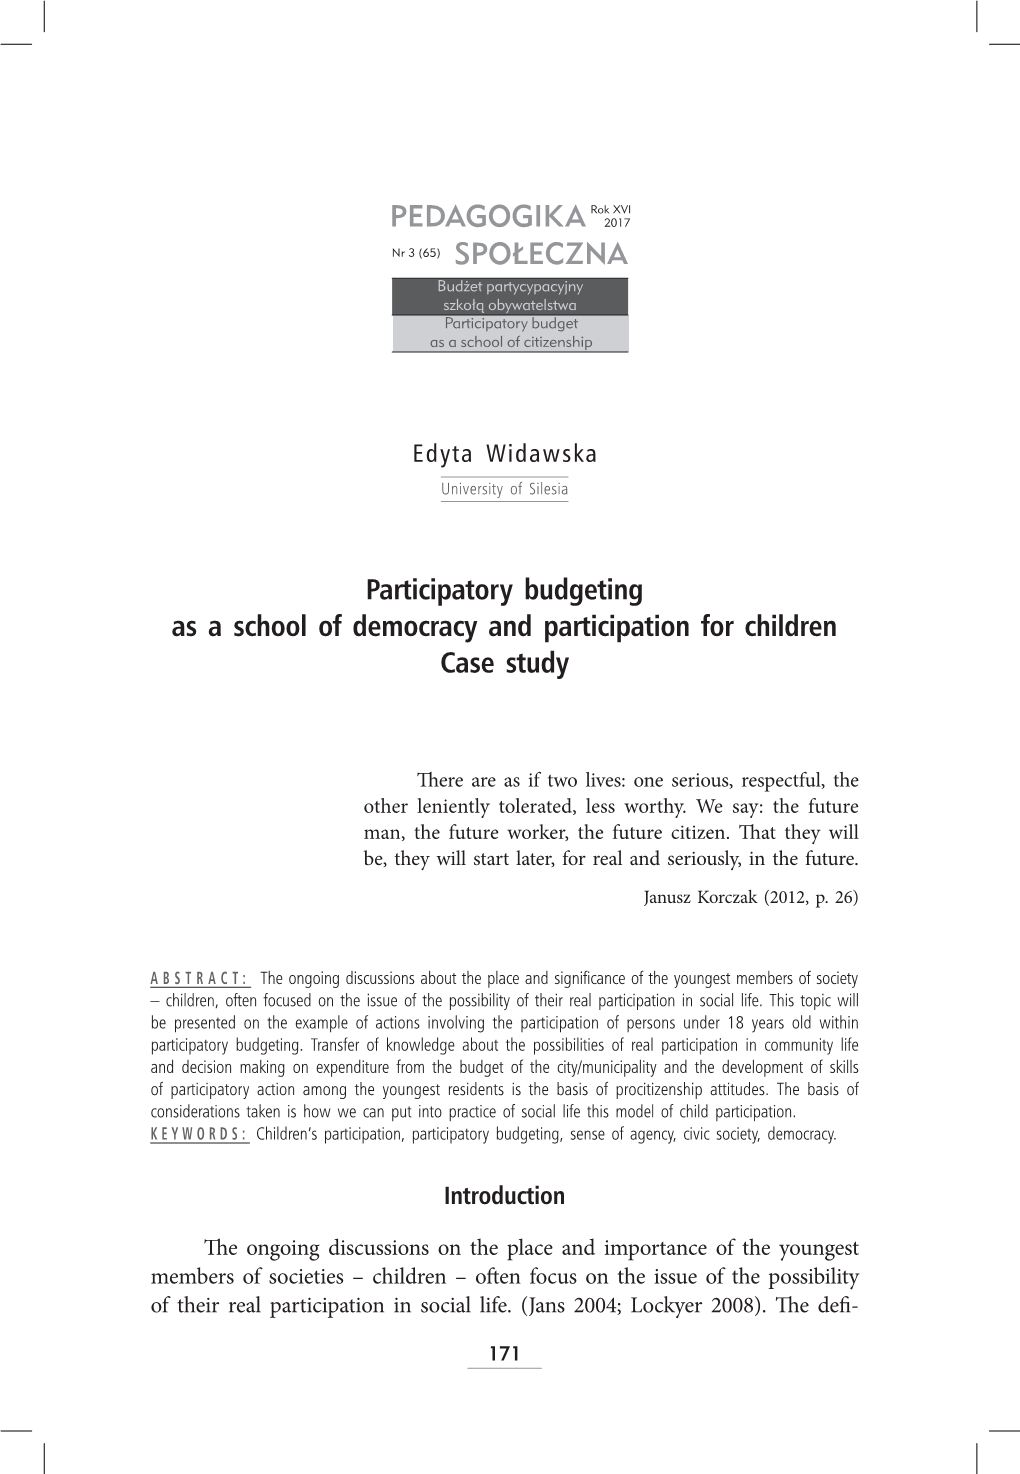 Participatory Budgeting As a School of Democracy and Participation for Children Case Study